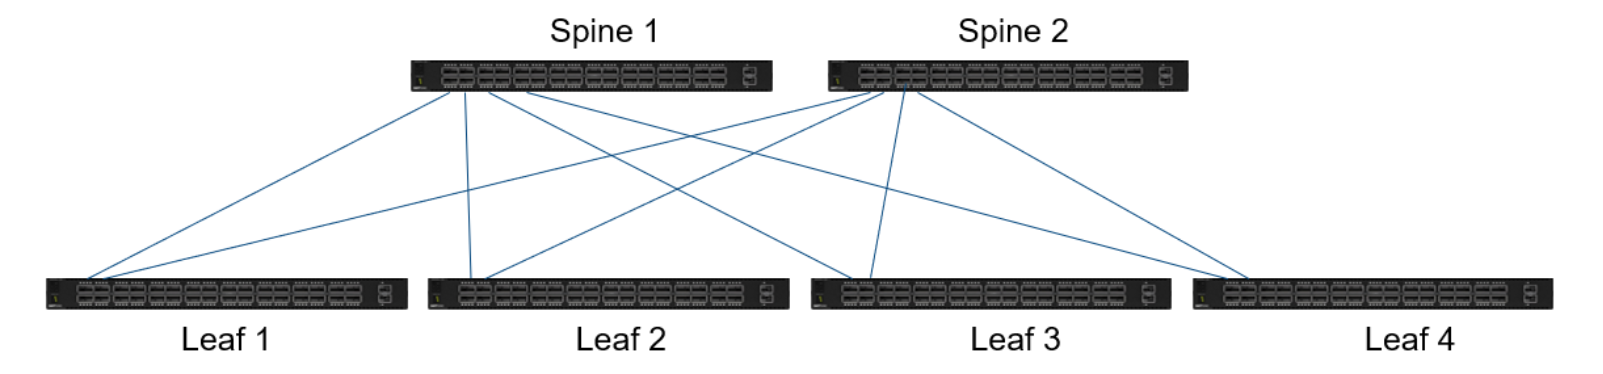 High-level topology of leaf and spine network connectivity.